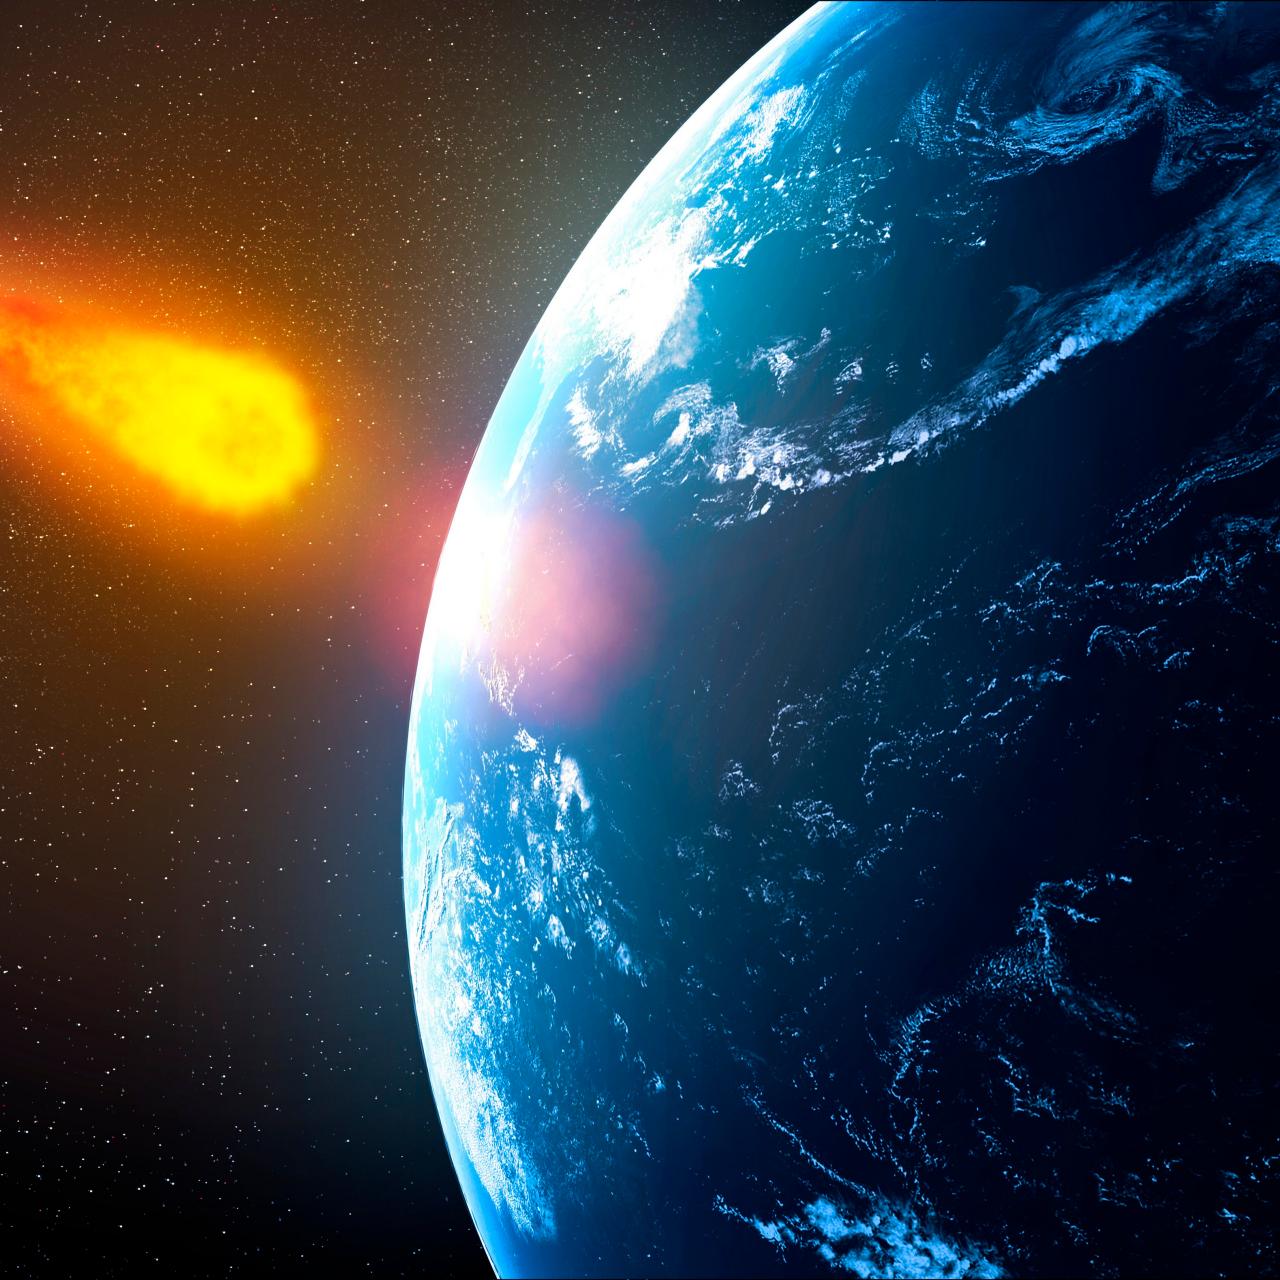 Astronomers have just found more than half a million new asteroids